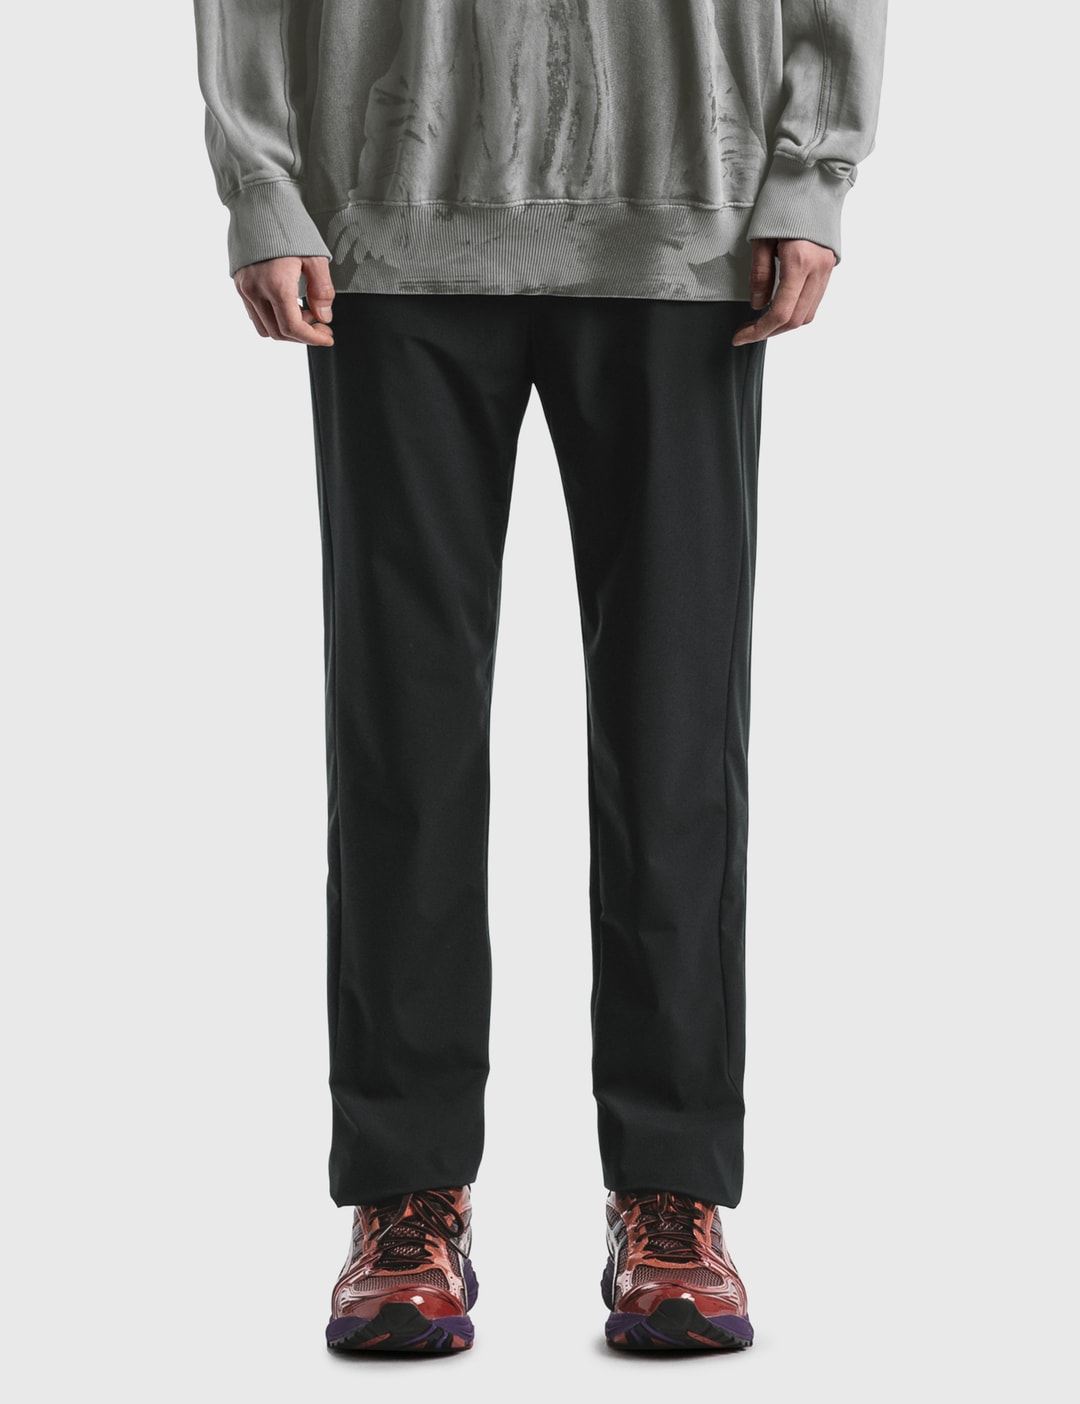 A-COLD-WALL* - Technical Tai Lored Trouser | HBX - Globally Curated ...